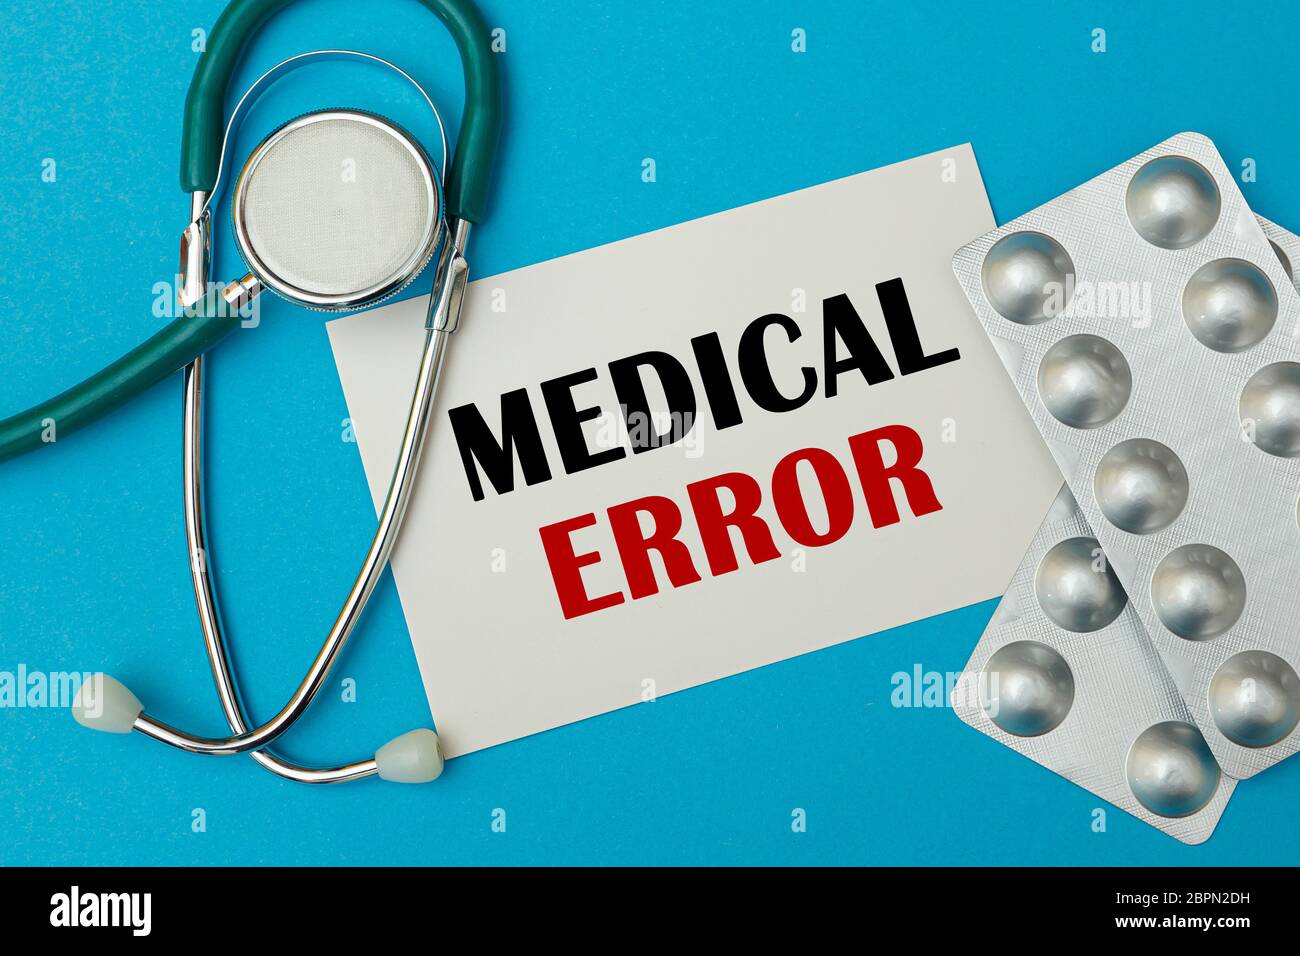 Card with text MEDICAL ERROR, medical concept Stock Photo